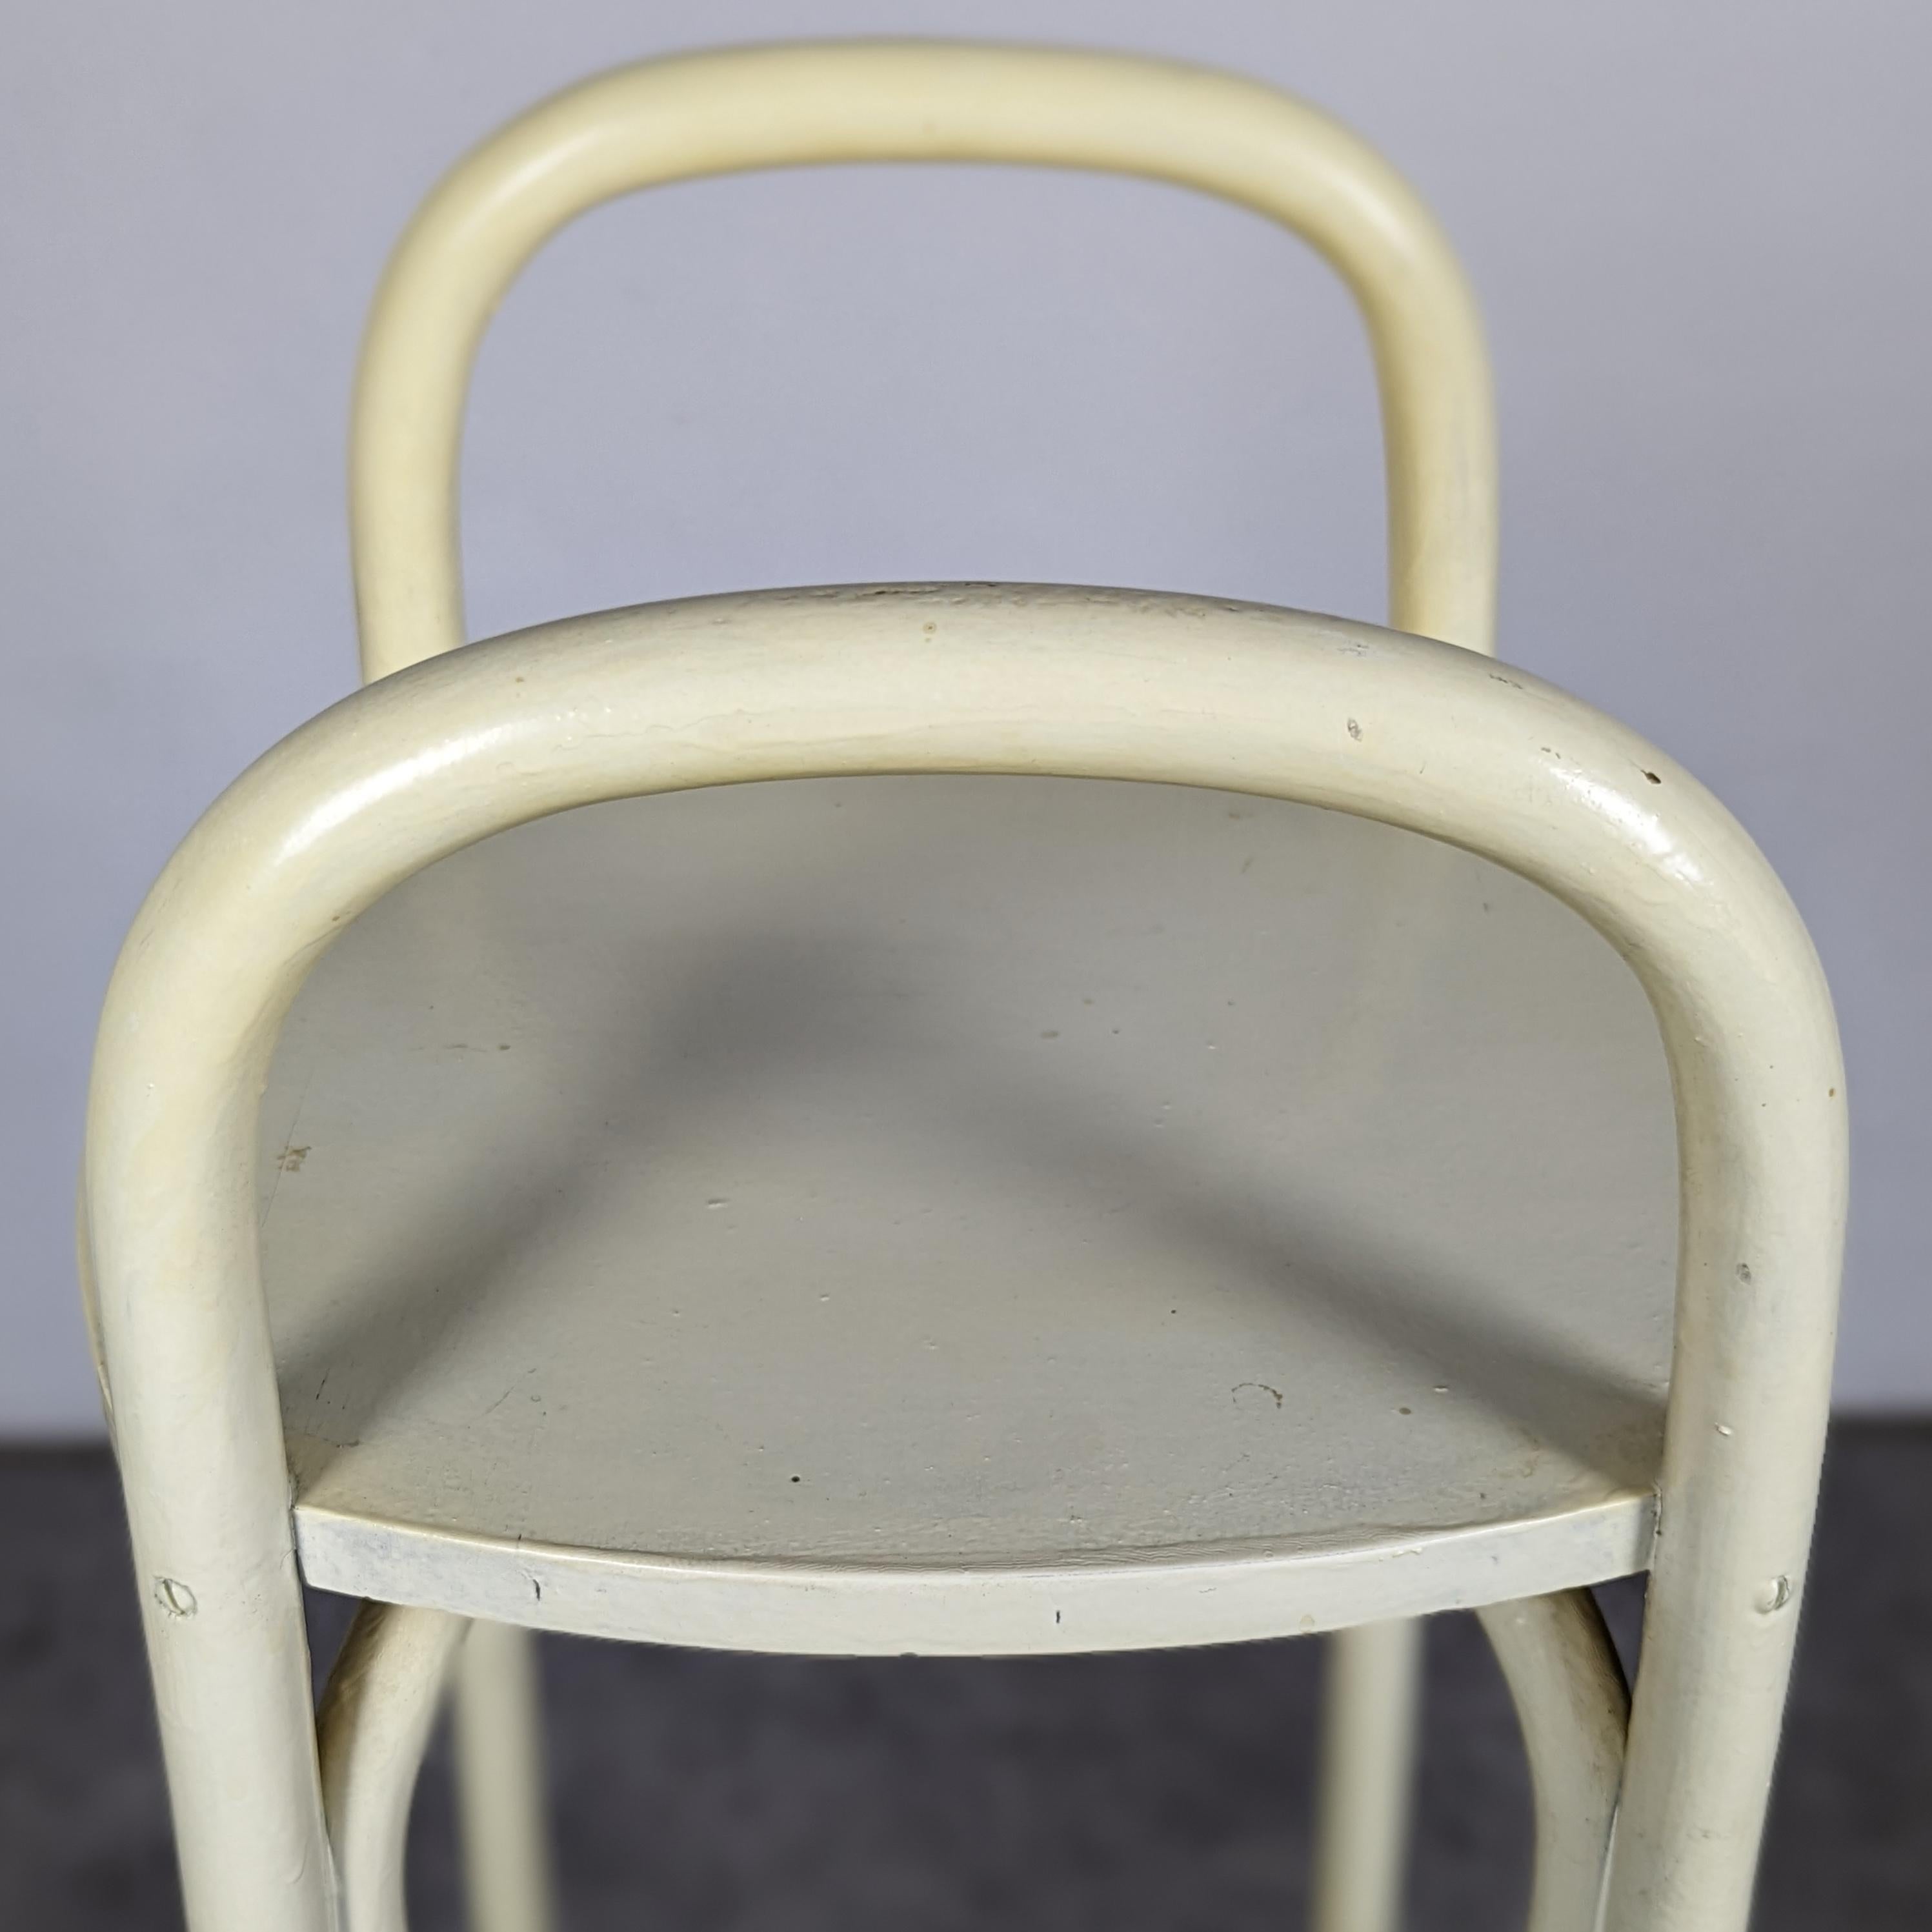 Rare Thonet Nr. 21 plant stand by Josef Hoffmann For Sale 1